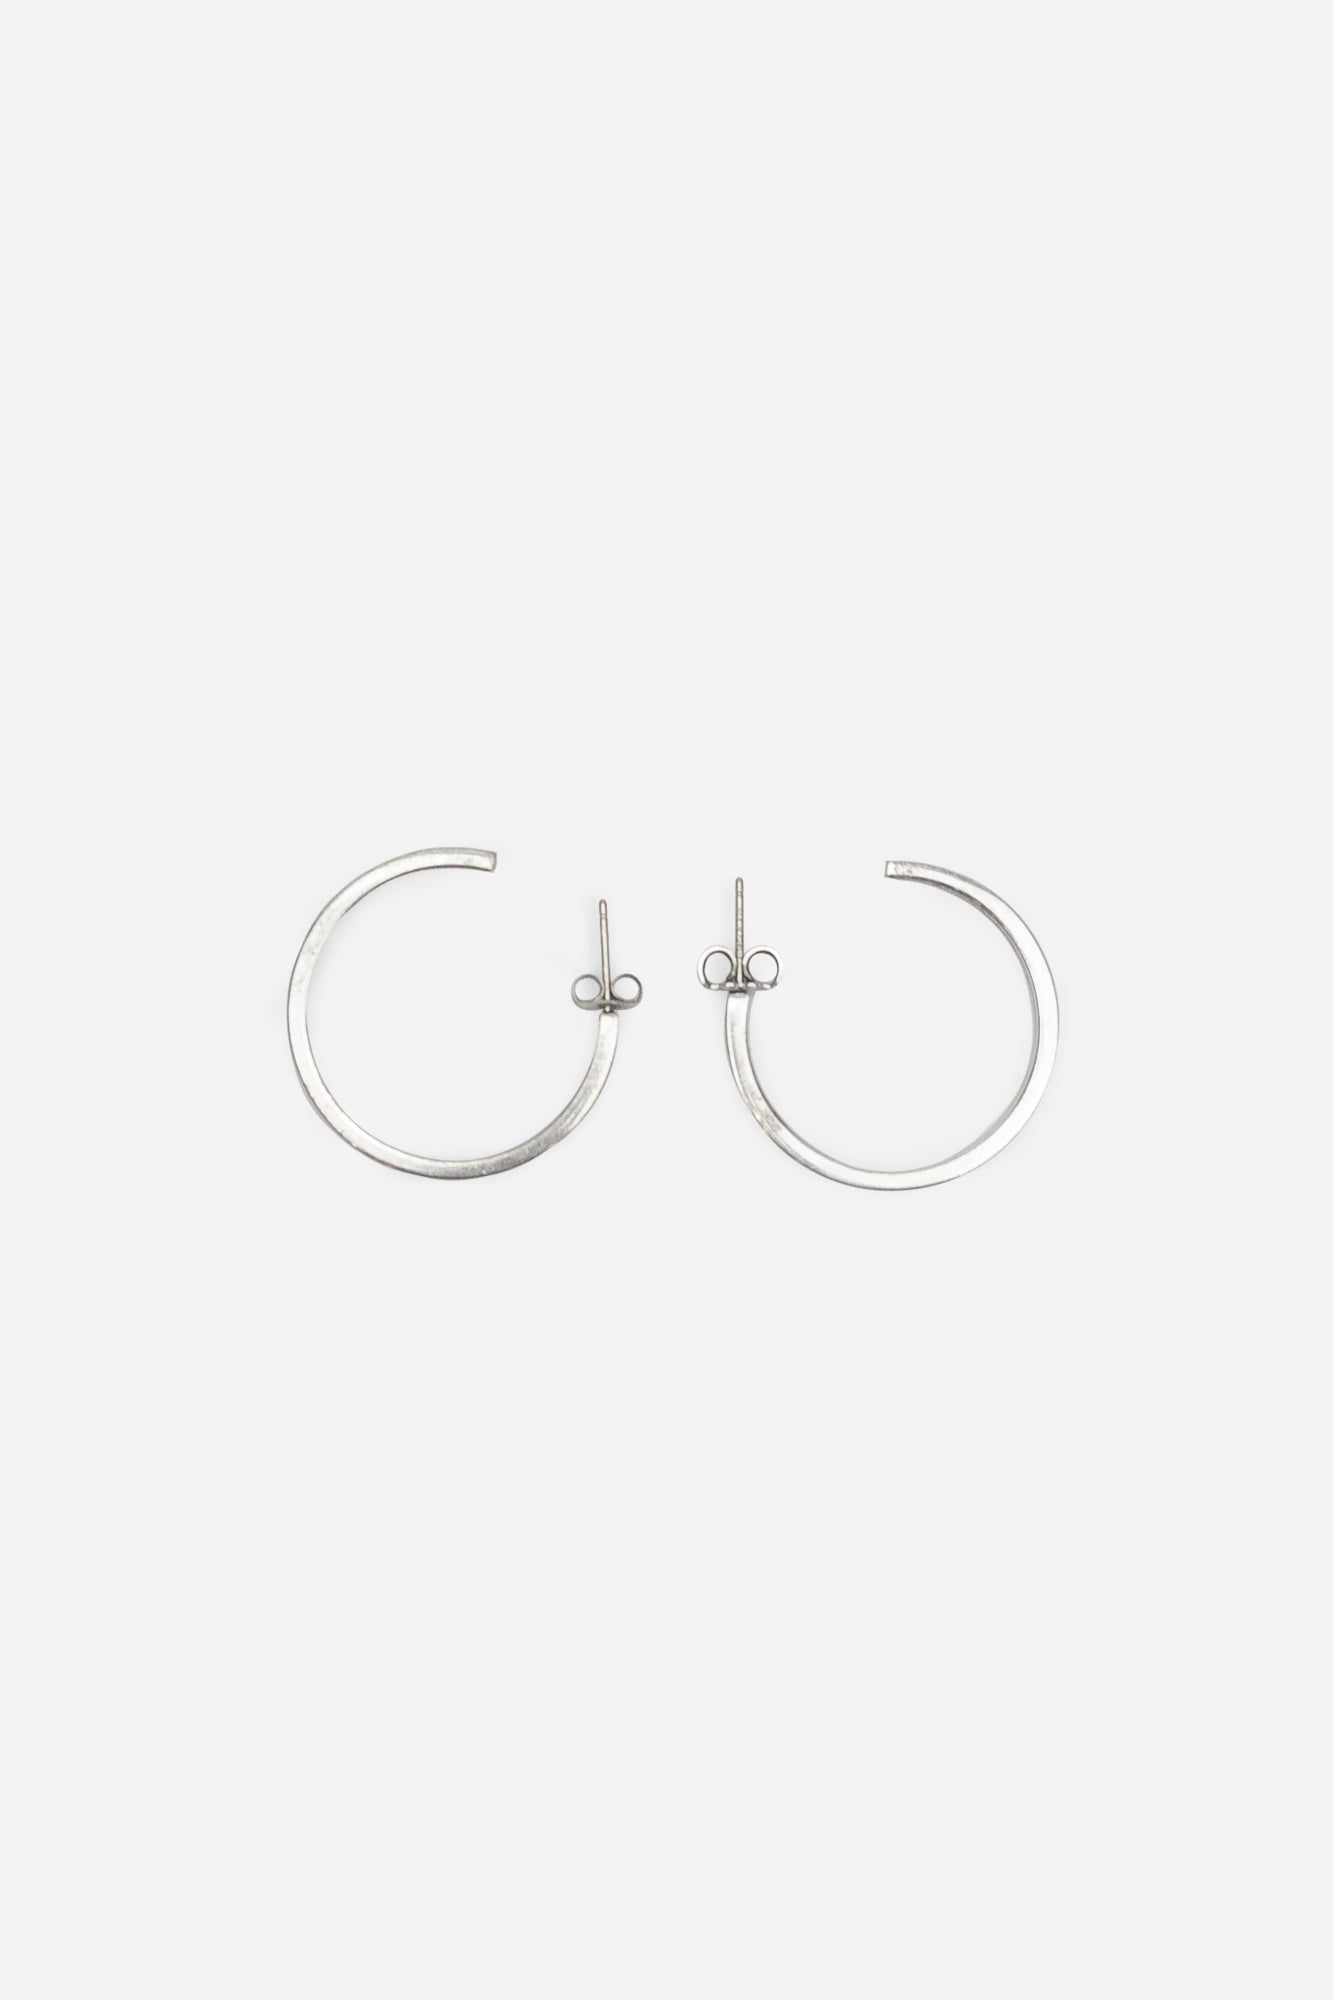 Tiffany 1837™ Narrow Hoop Earring with Post Backing in Silver